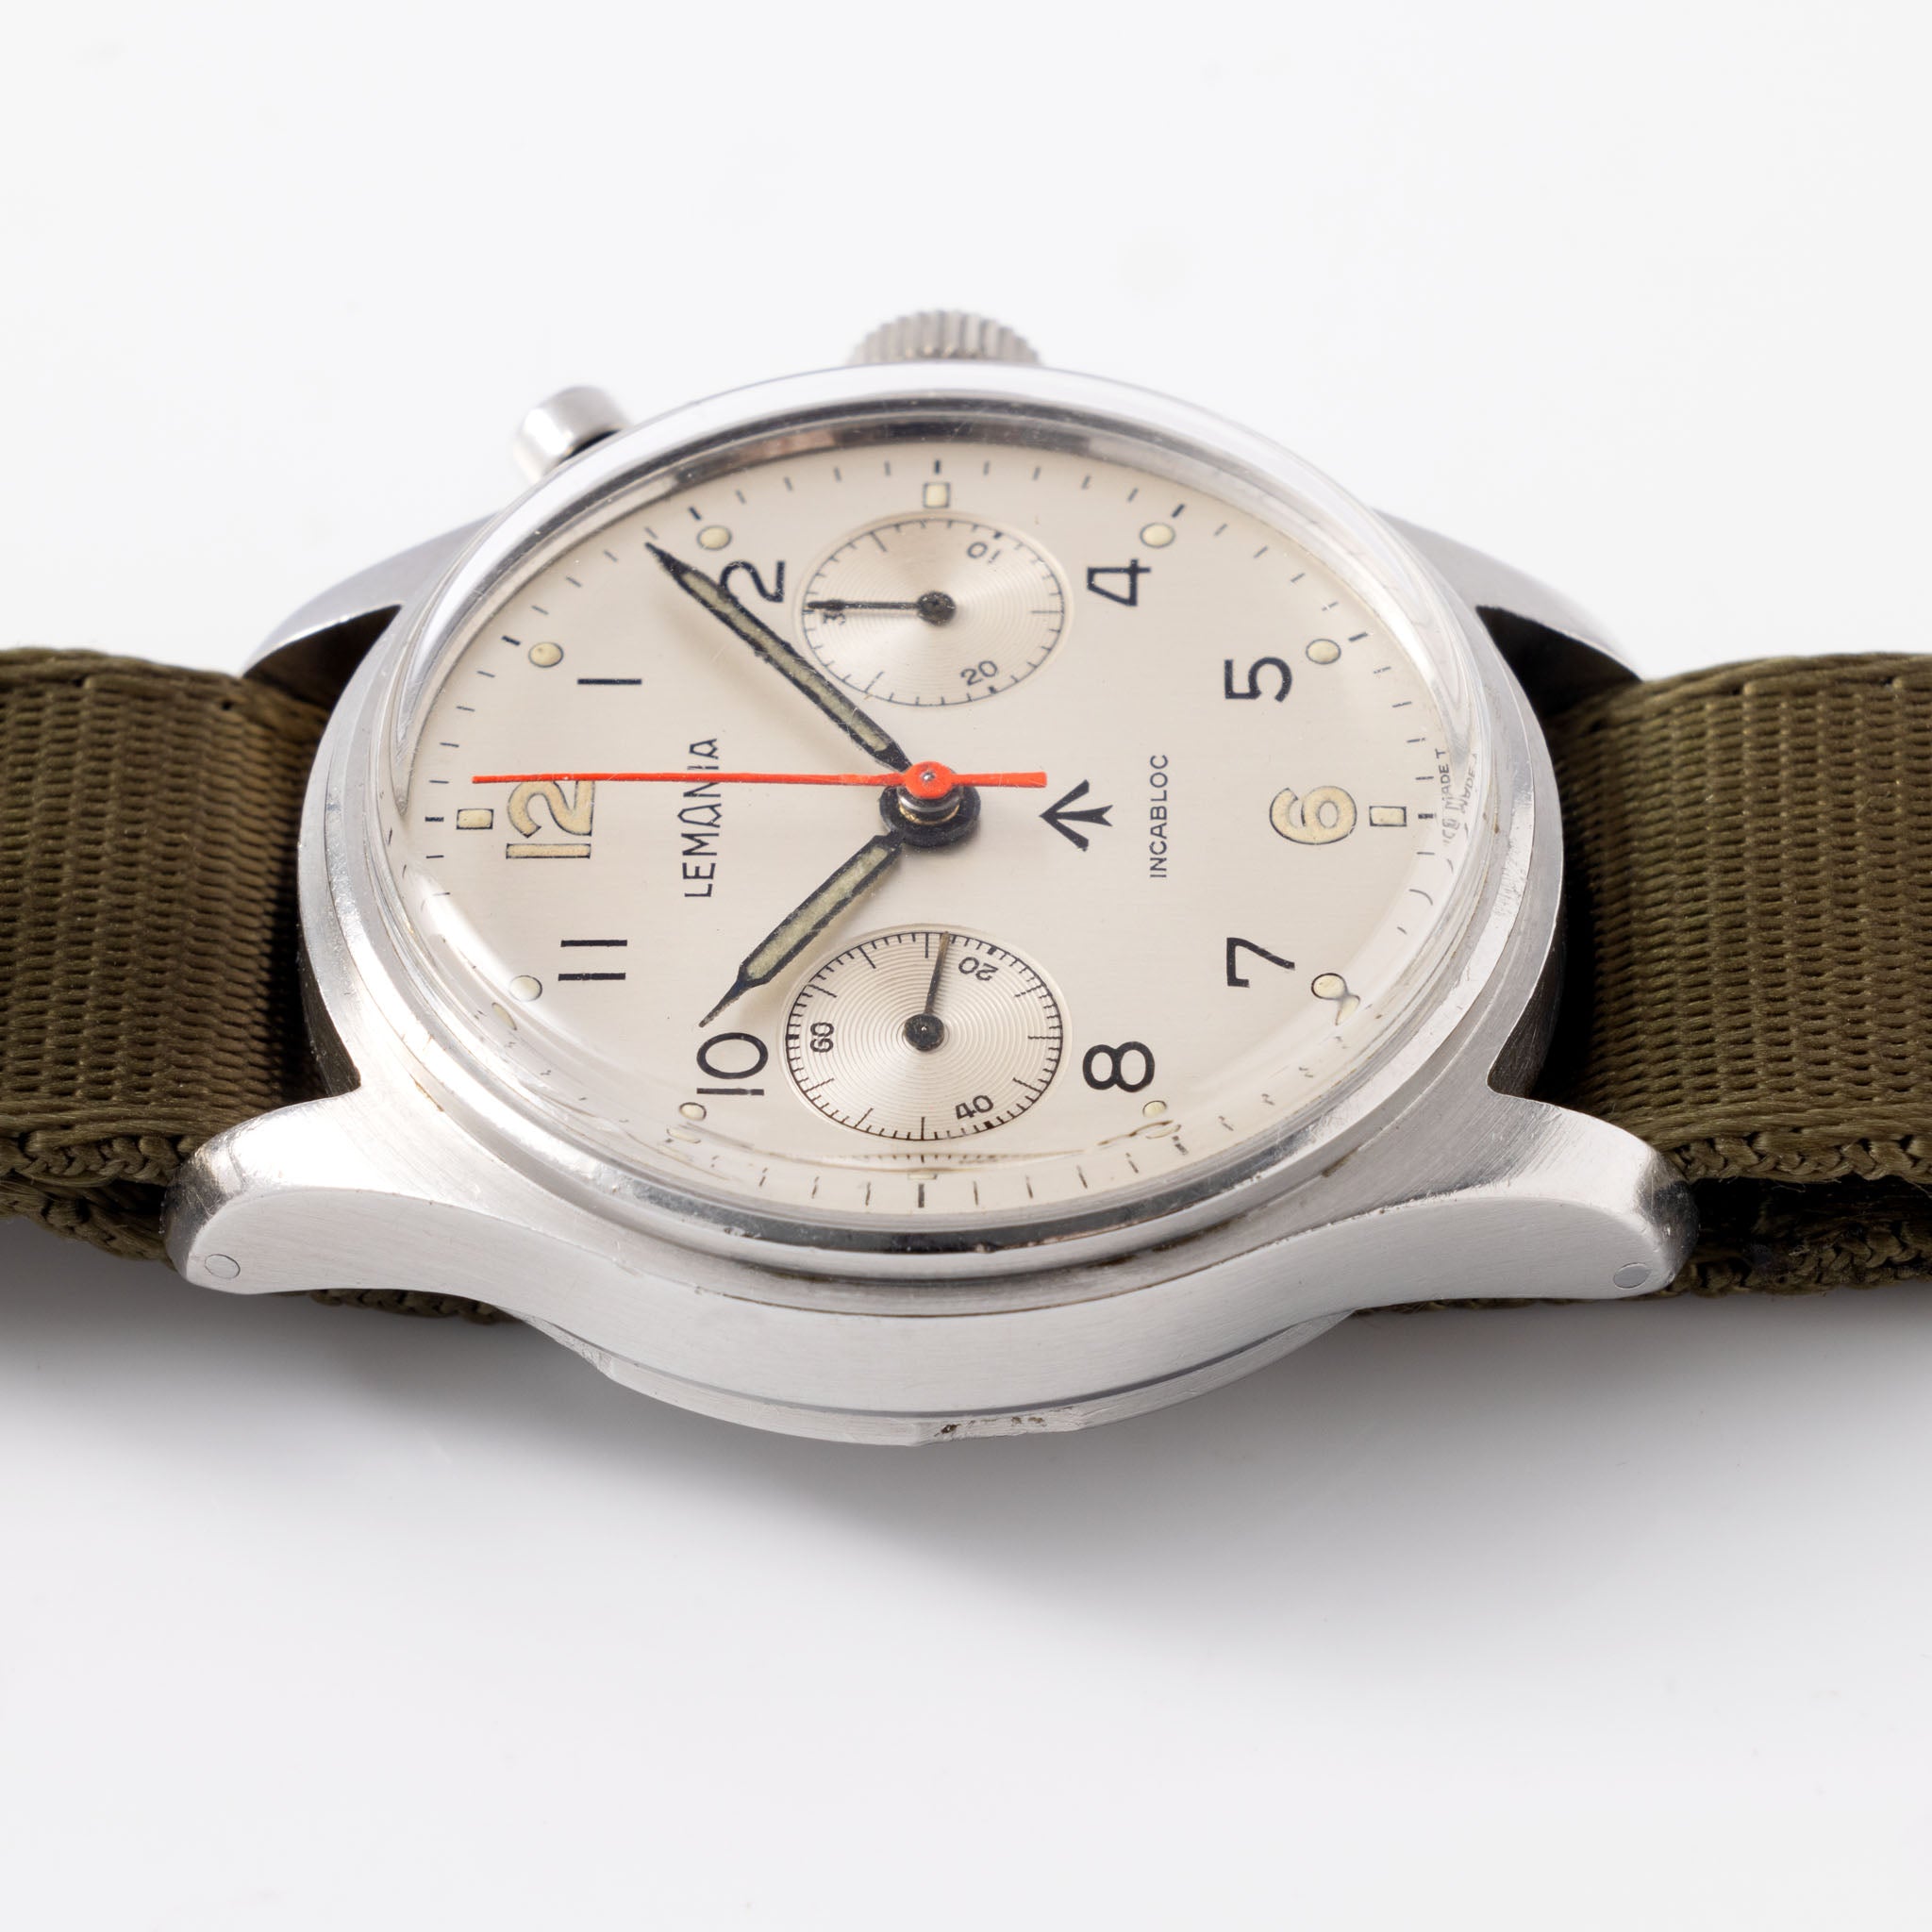 Lemania Monopusher Chronograph British Armed Forces